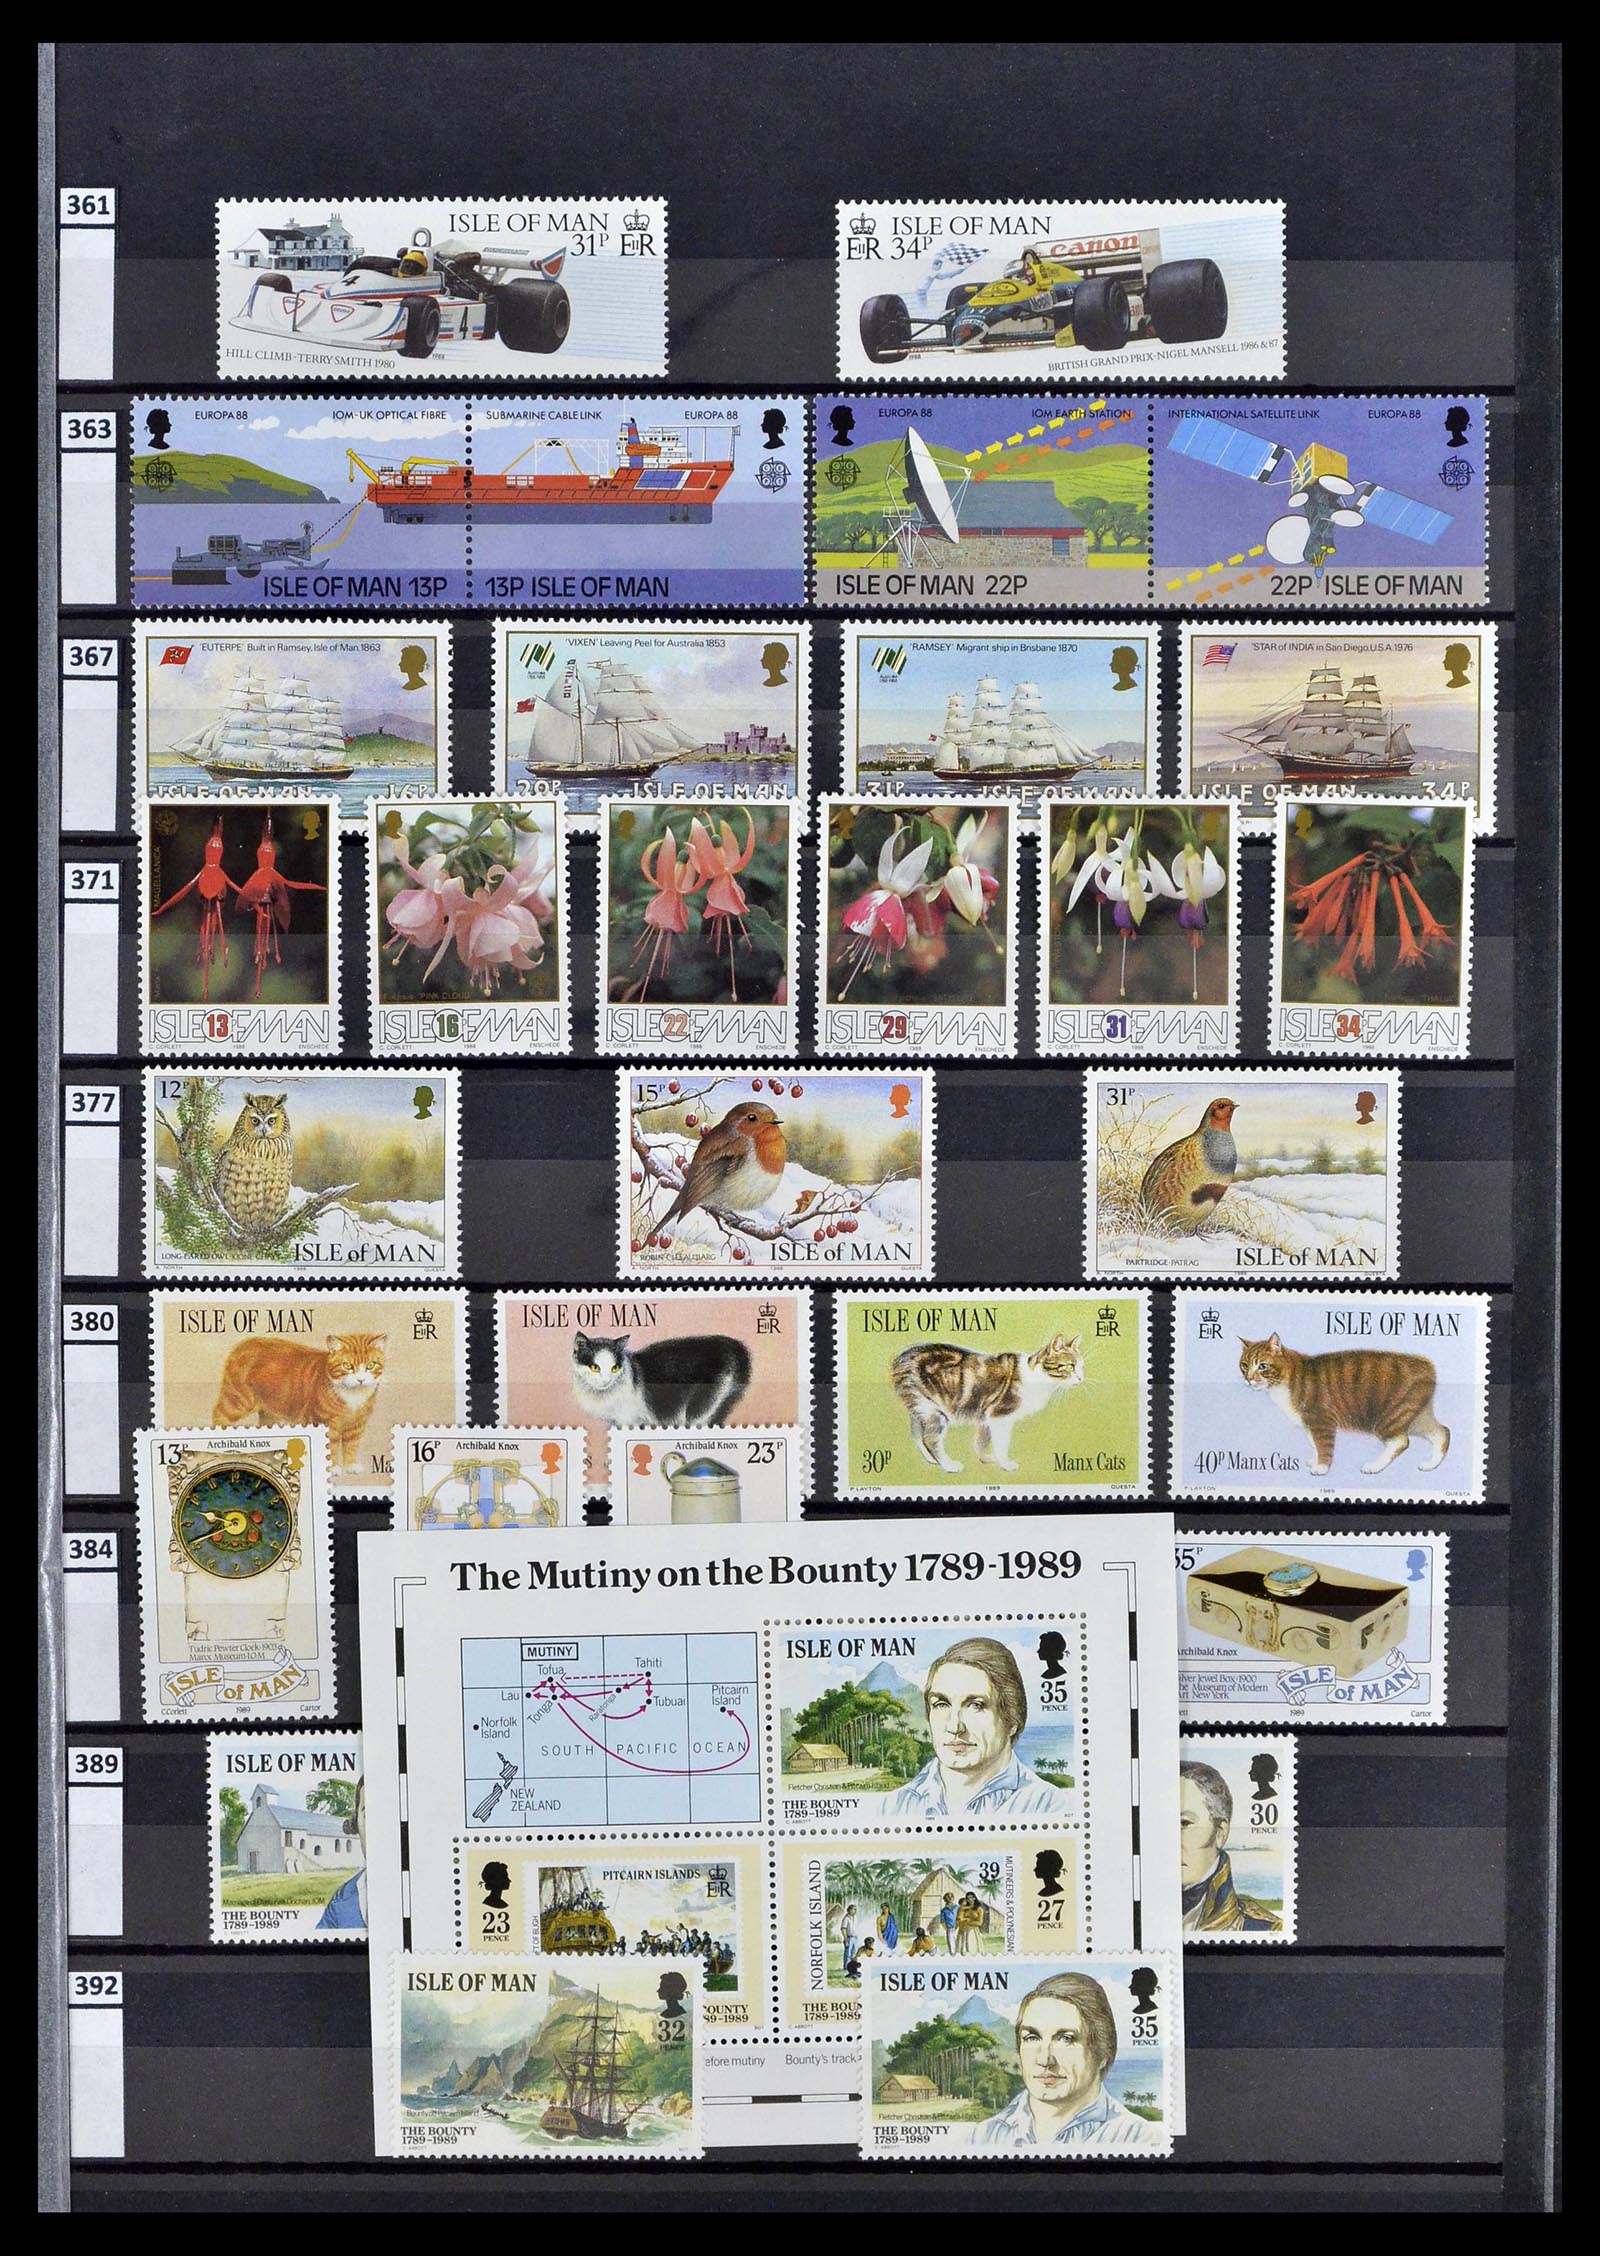 39197 0114 - Stamp collection 39197 Channel Islands 1941-2015.